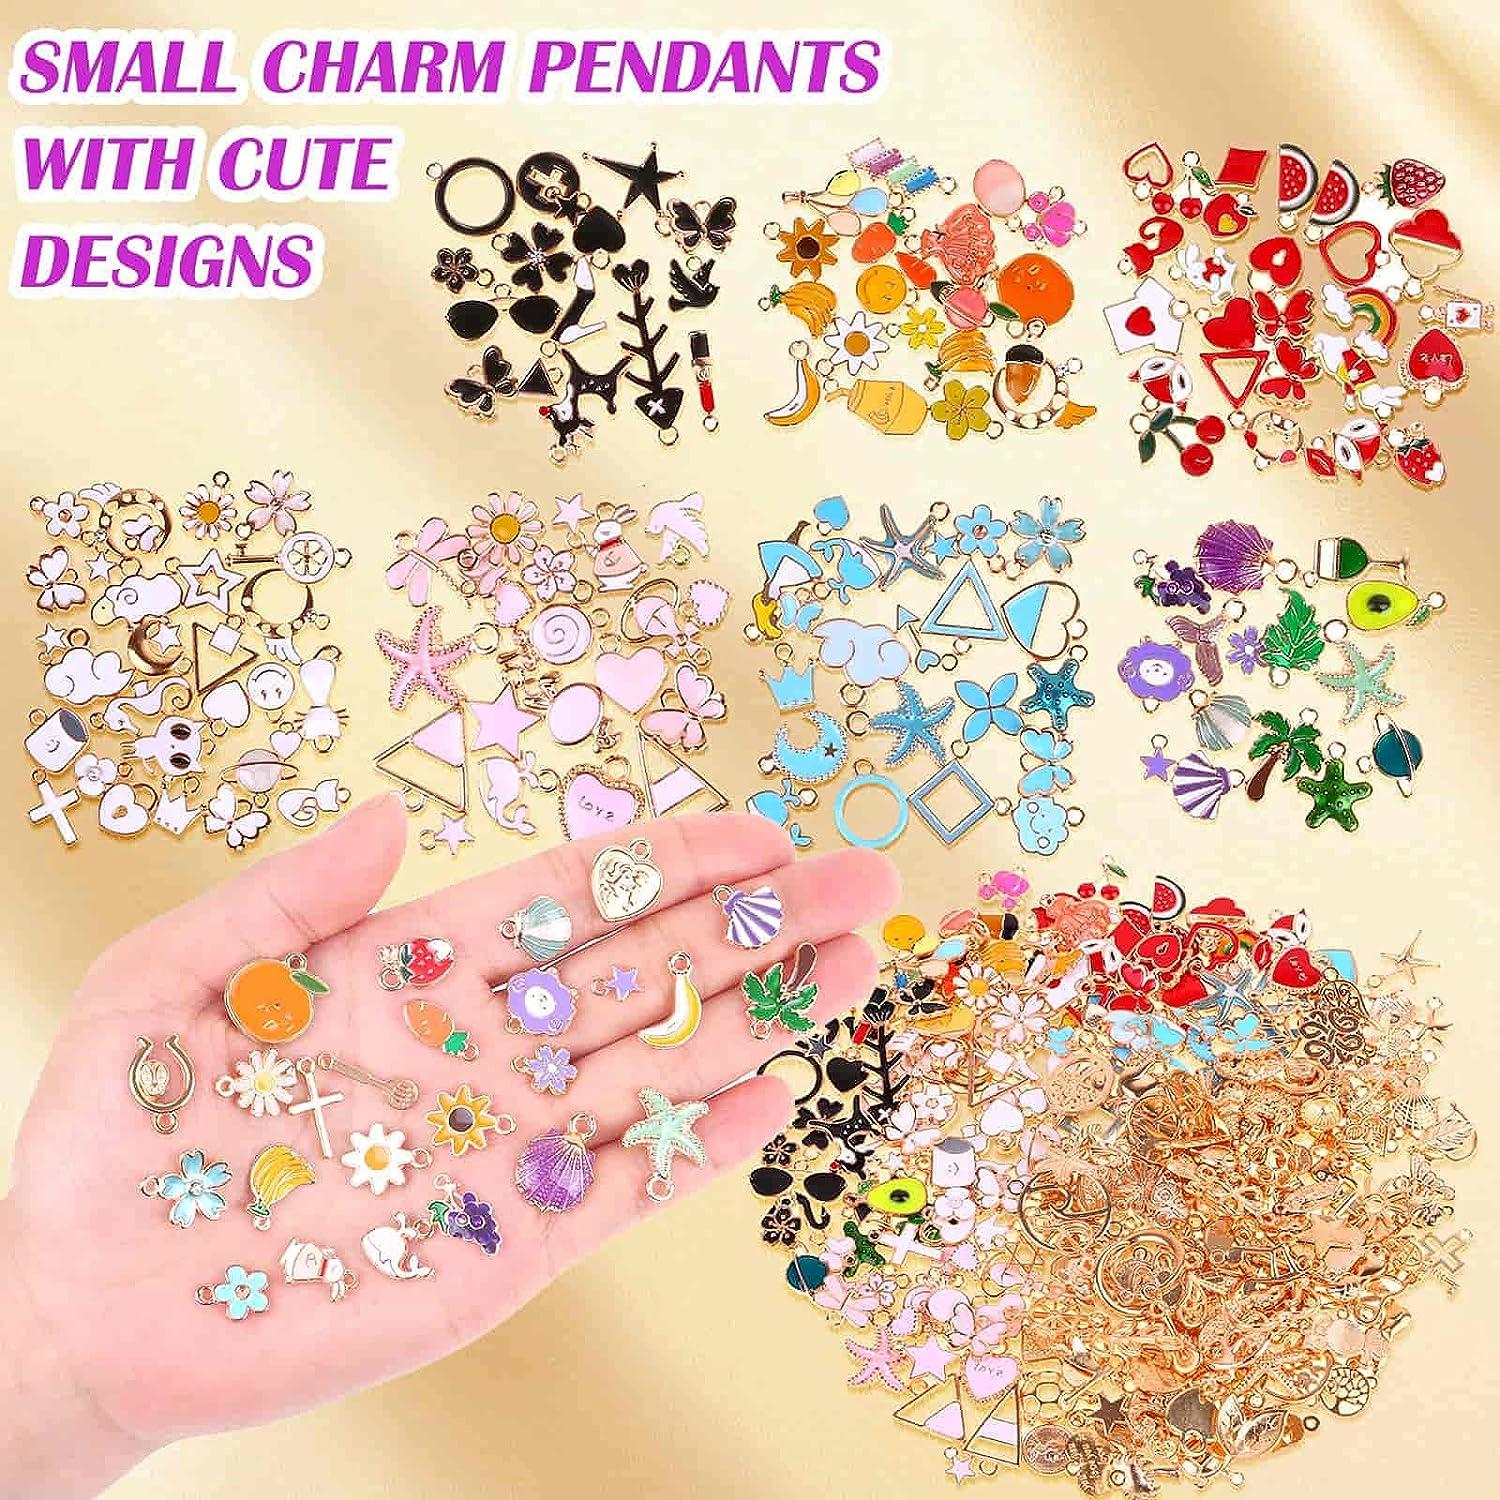 Bueautybox 31pcs Mixed Enamel Charms for Jewelry Making Pendants Colorful  DIY Pendant Necklace Earrings Bracelet Crafting